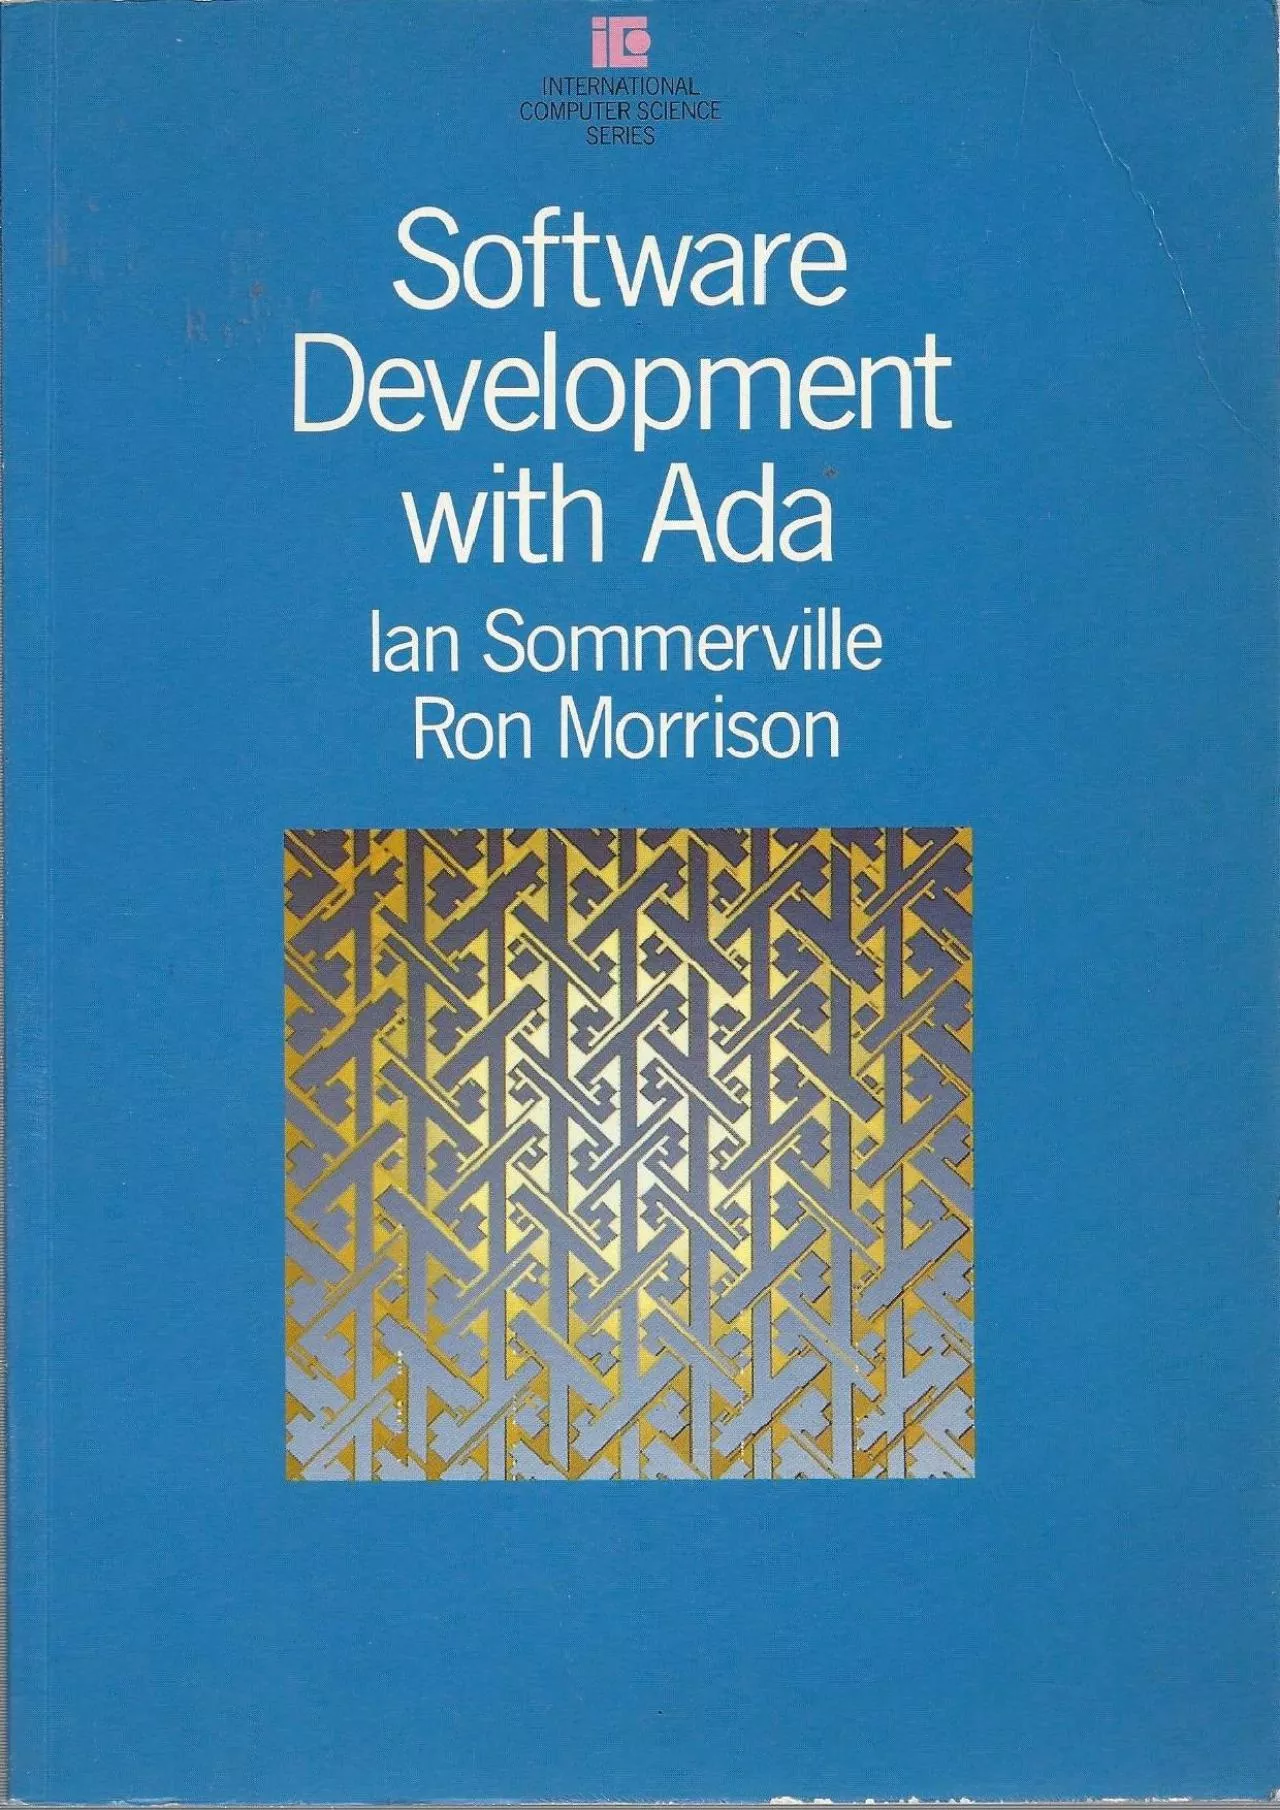 [READING BOOK]-Software Development With Ada (International Computer Science Series)